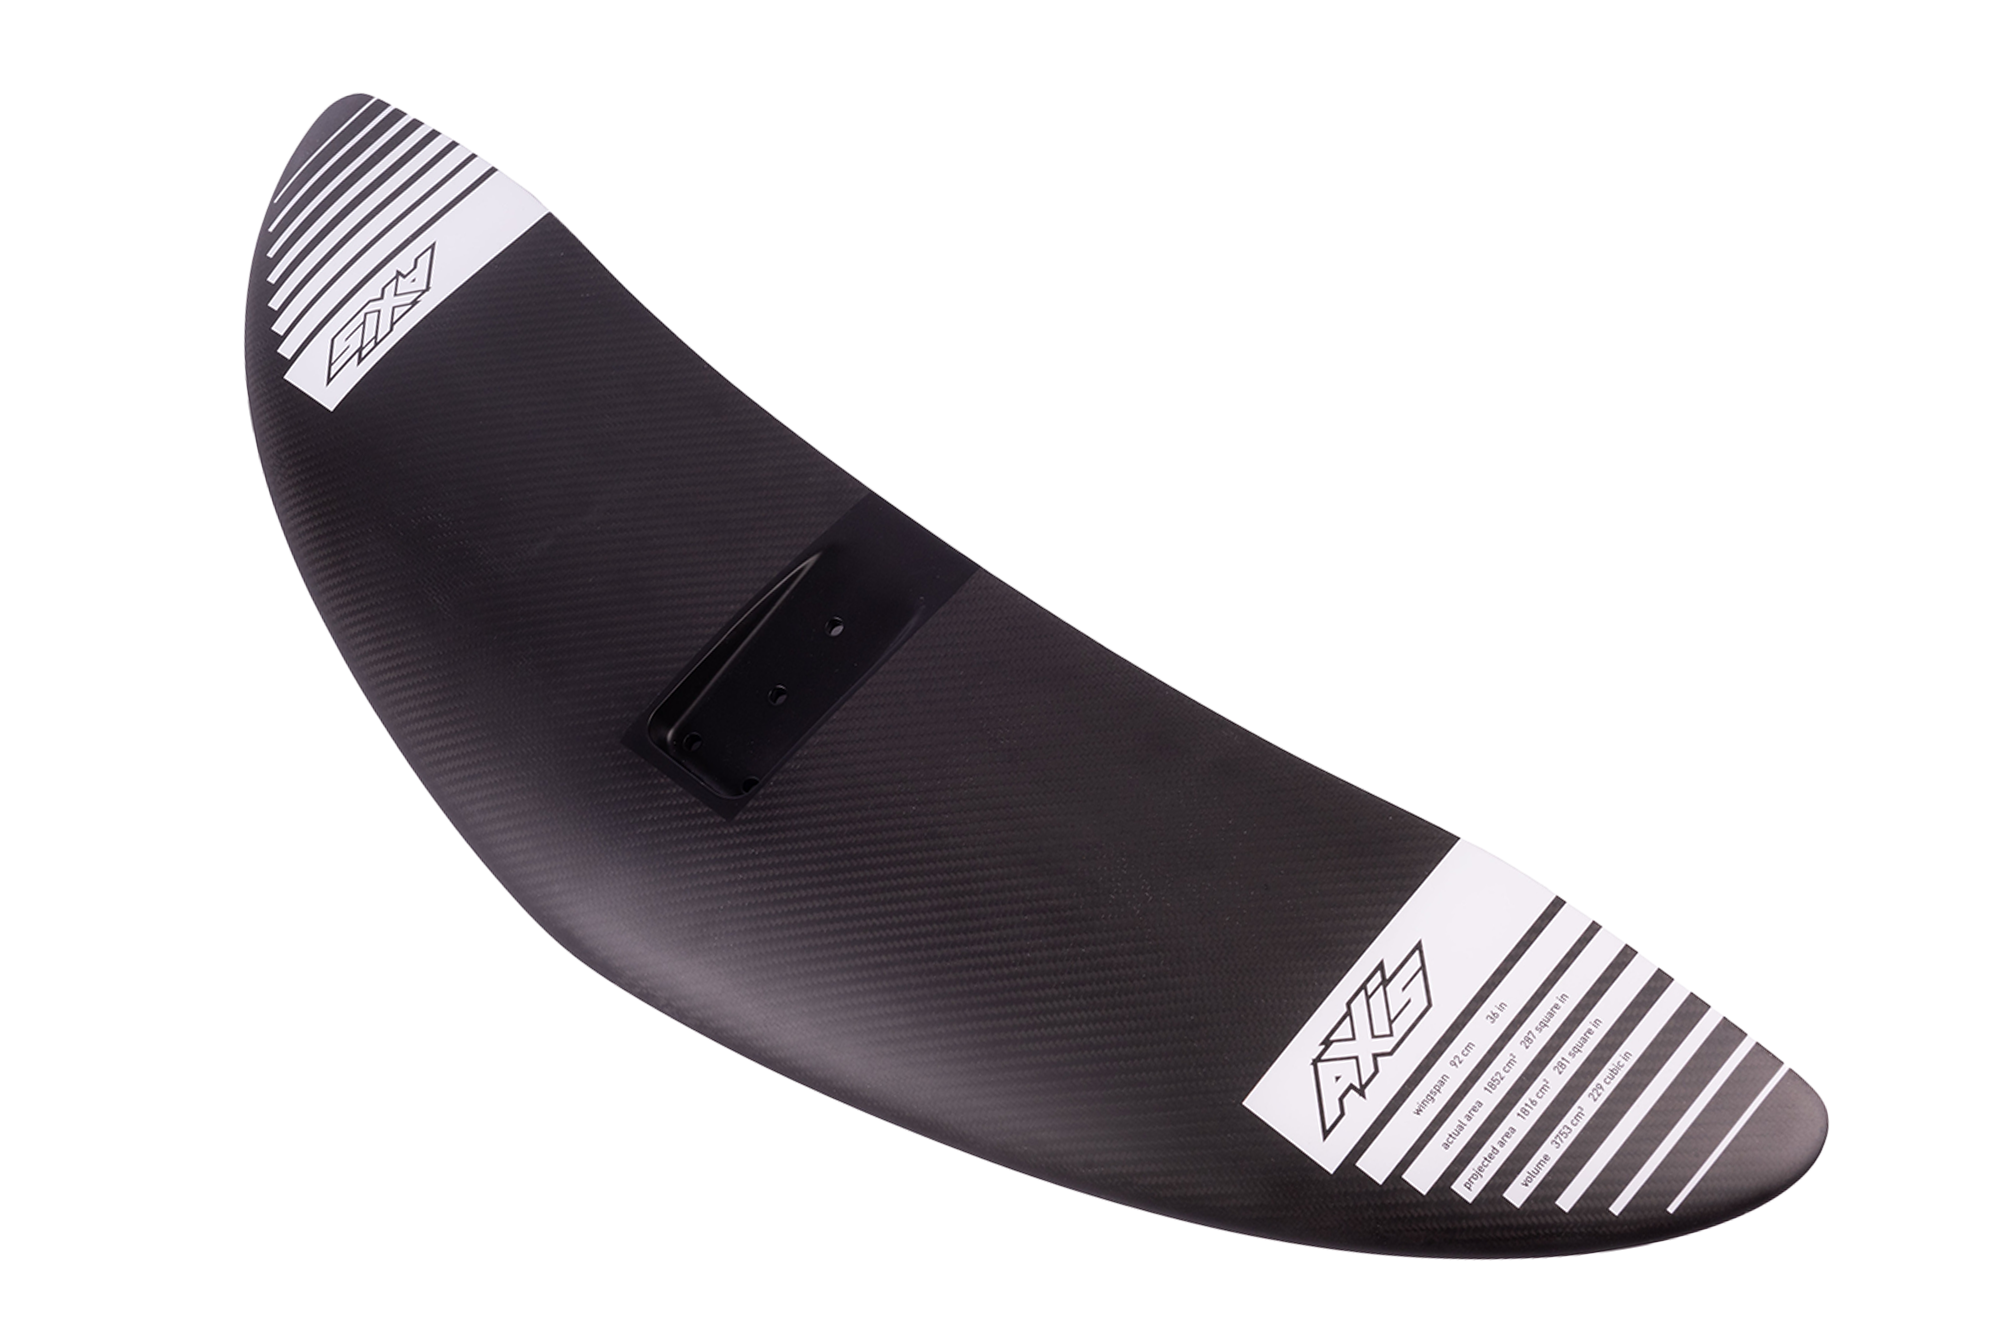 920mm Carbon Front Wing